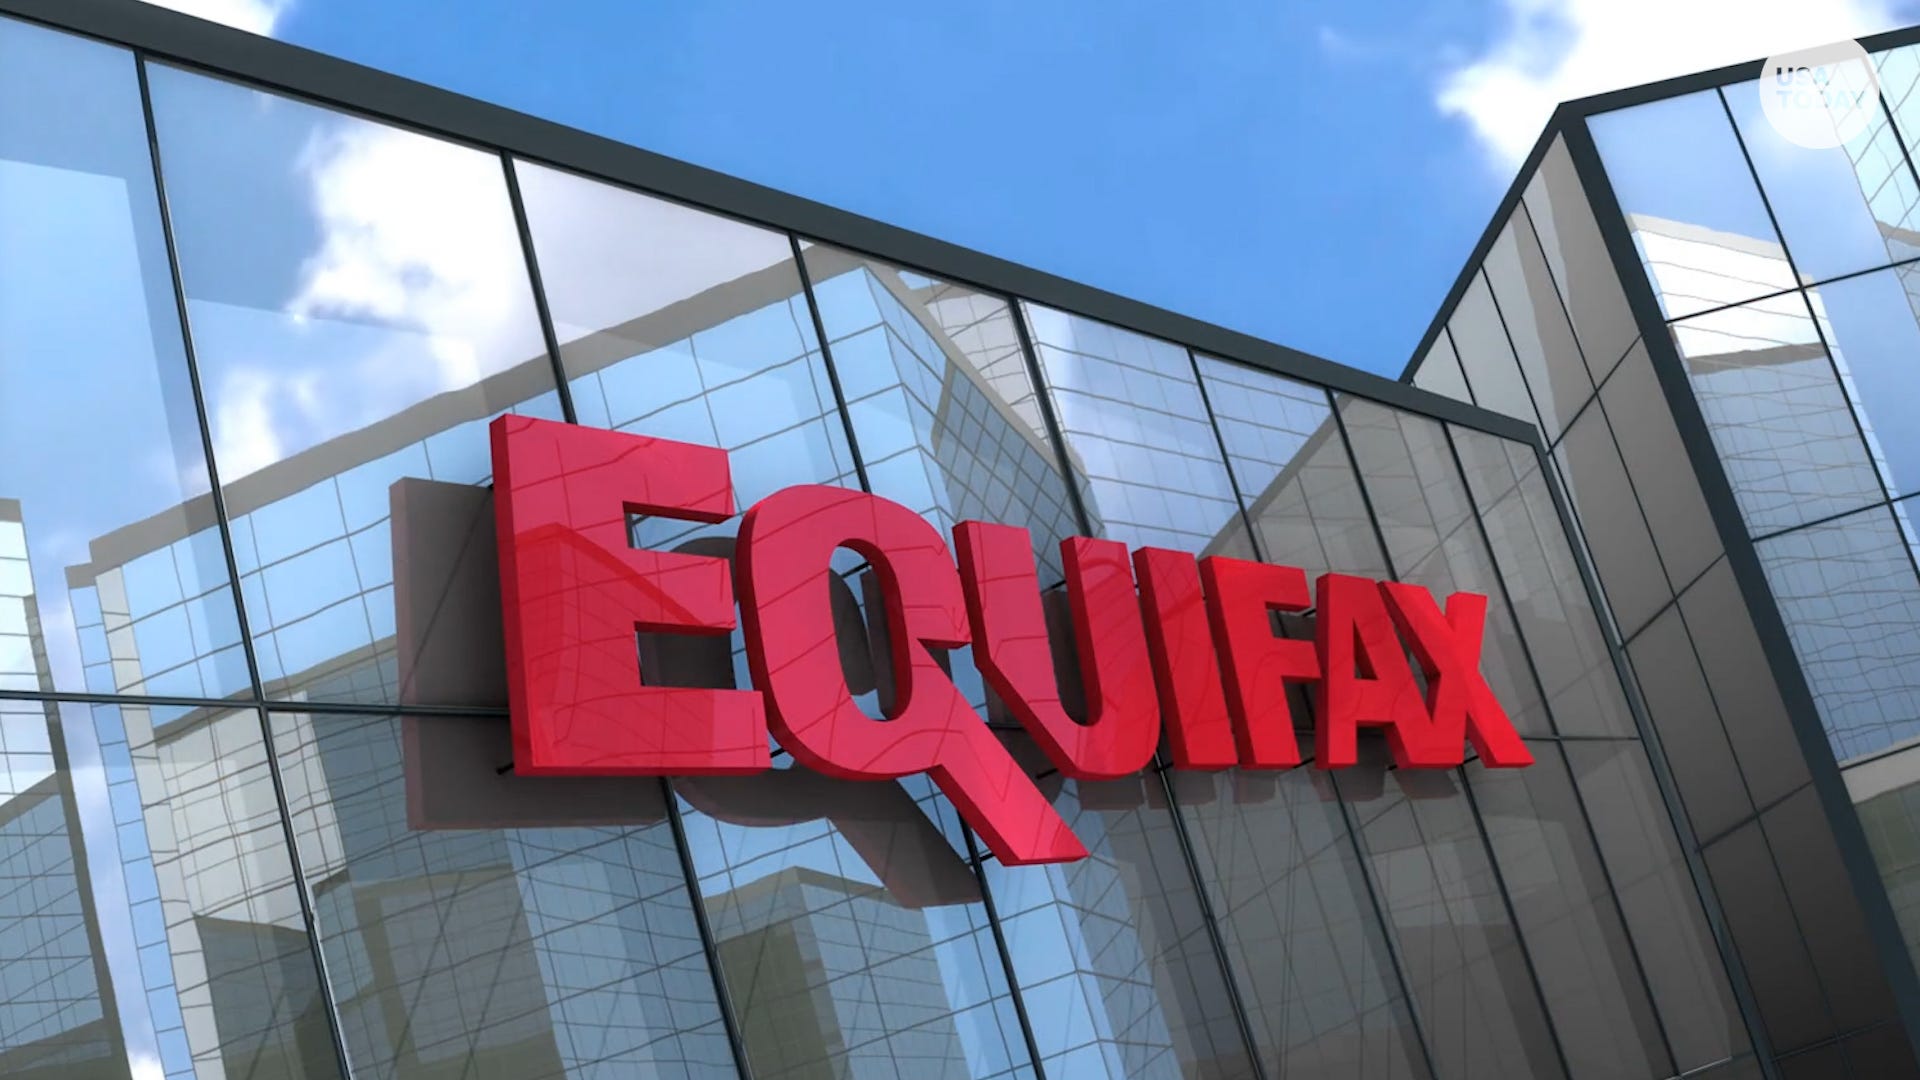 I finally got the Equifax credit monitoring serviceHere's why I still  don't feel safe- The Washington Post